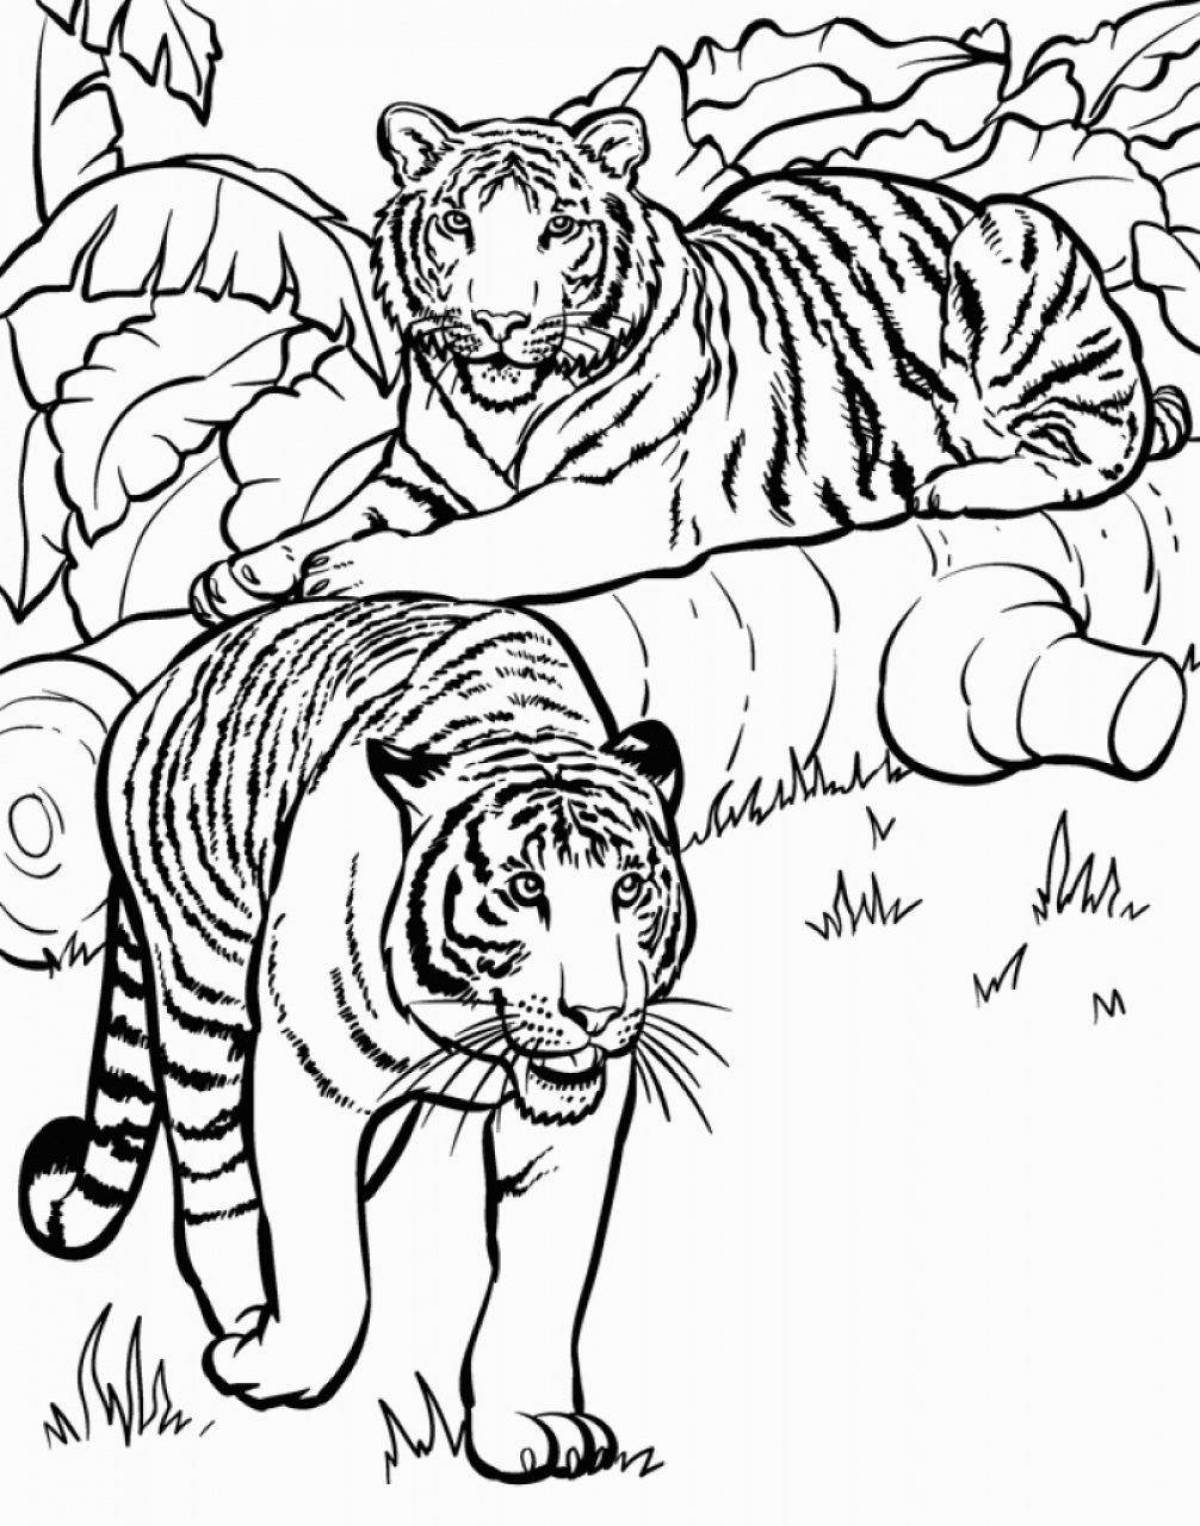 Delightful tiger coloring book for girls